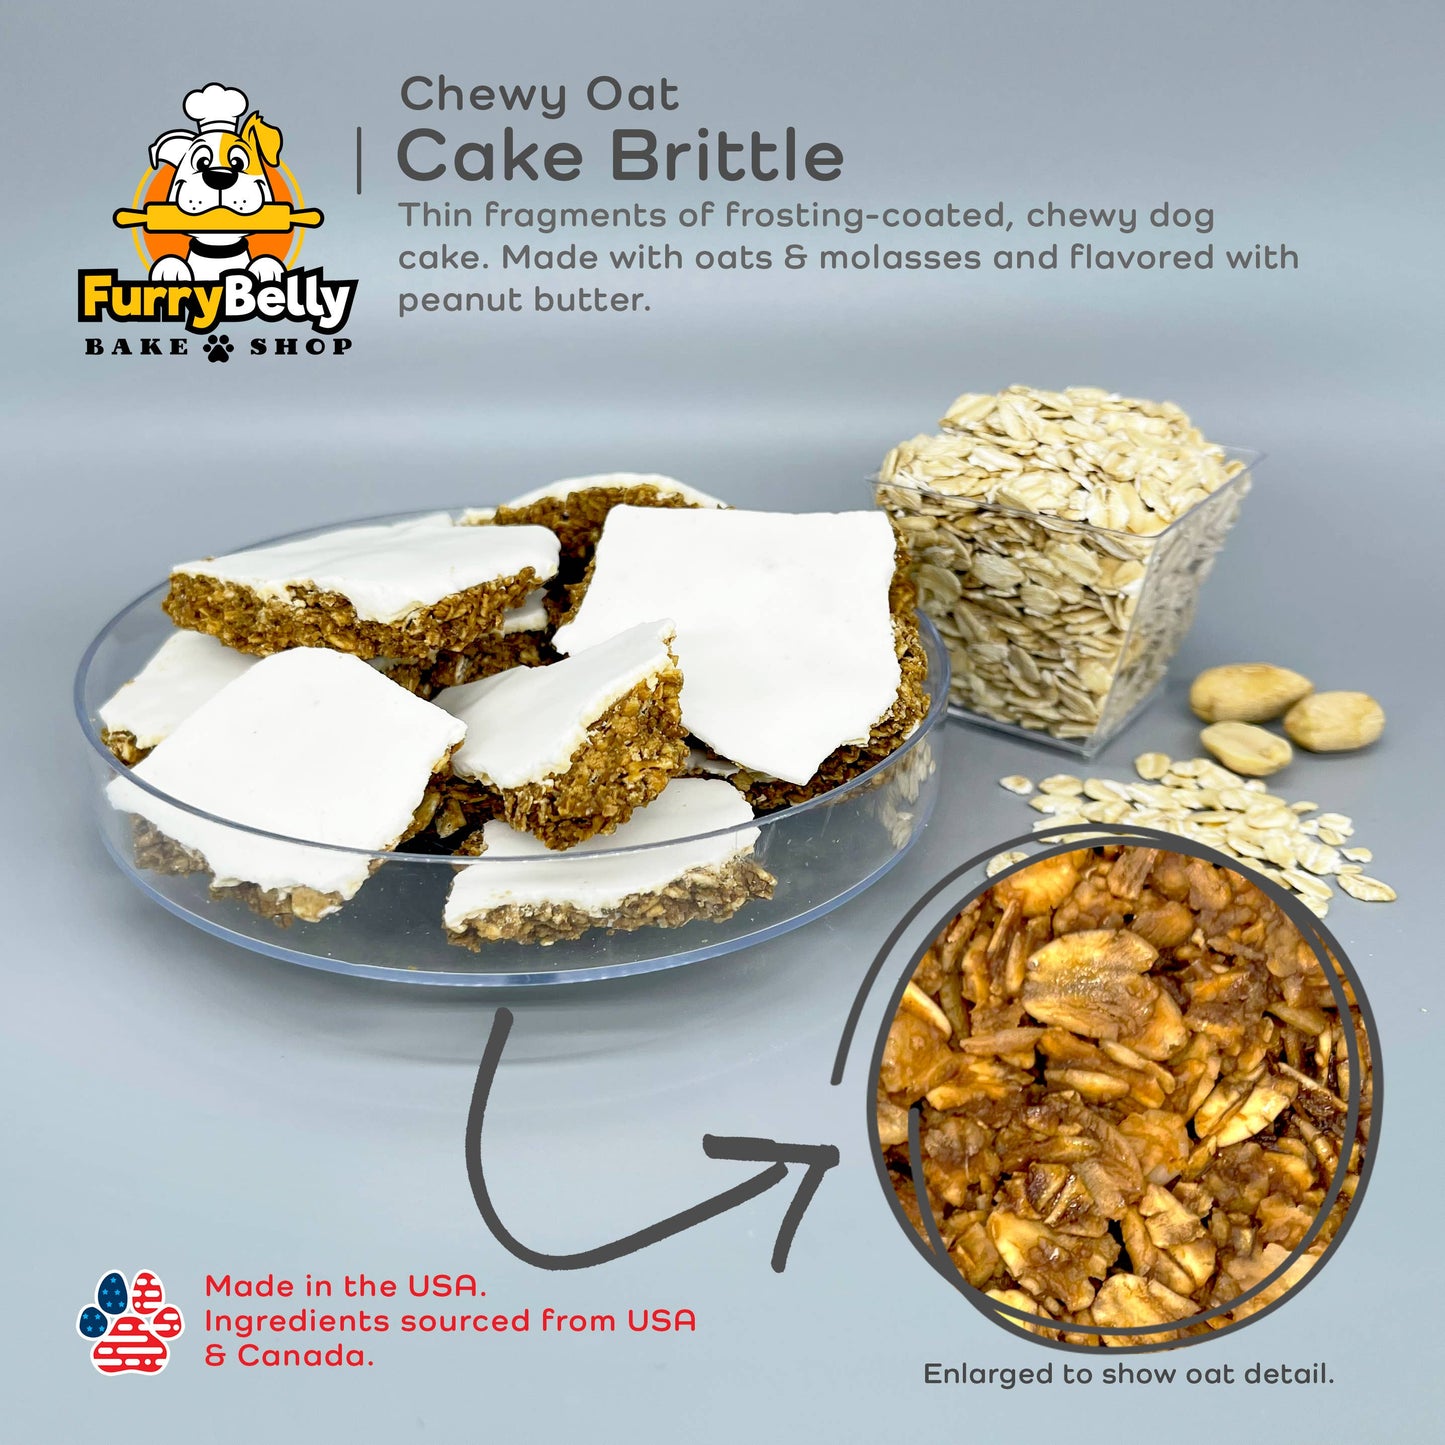 Frosted Chewy Oat Cake Brittle, 10 oz. pkg.